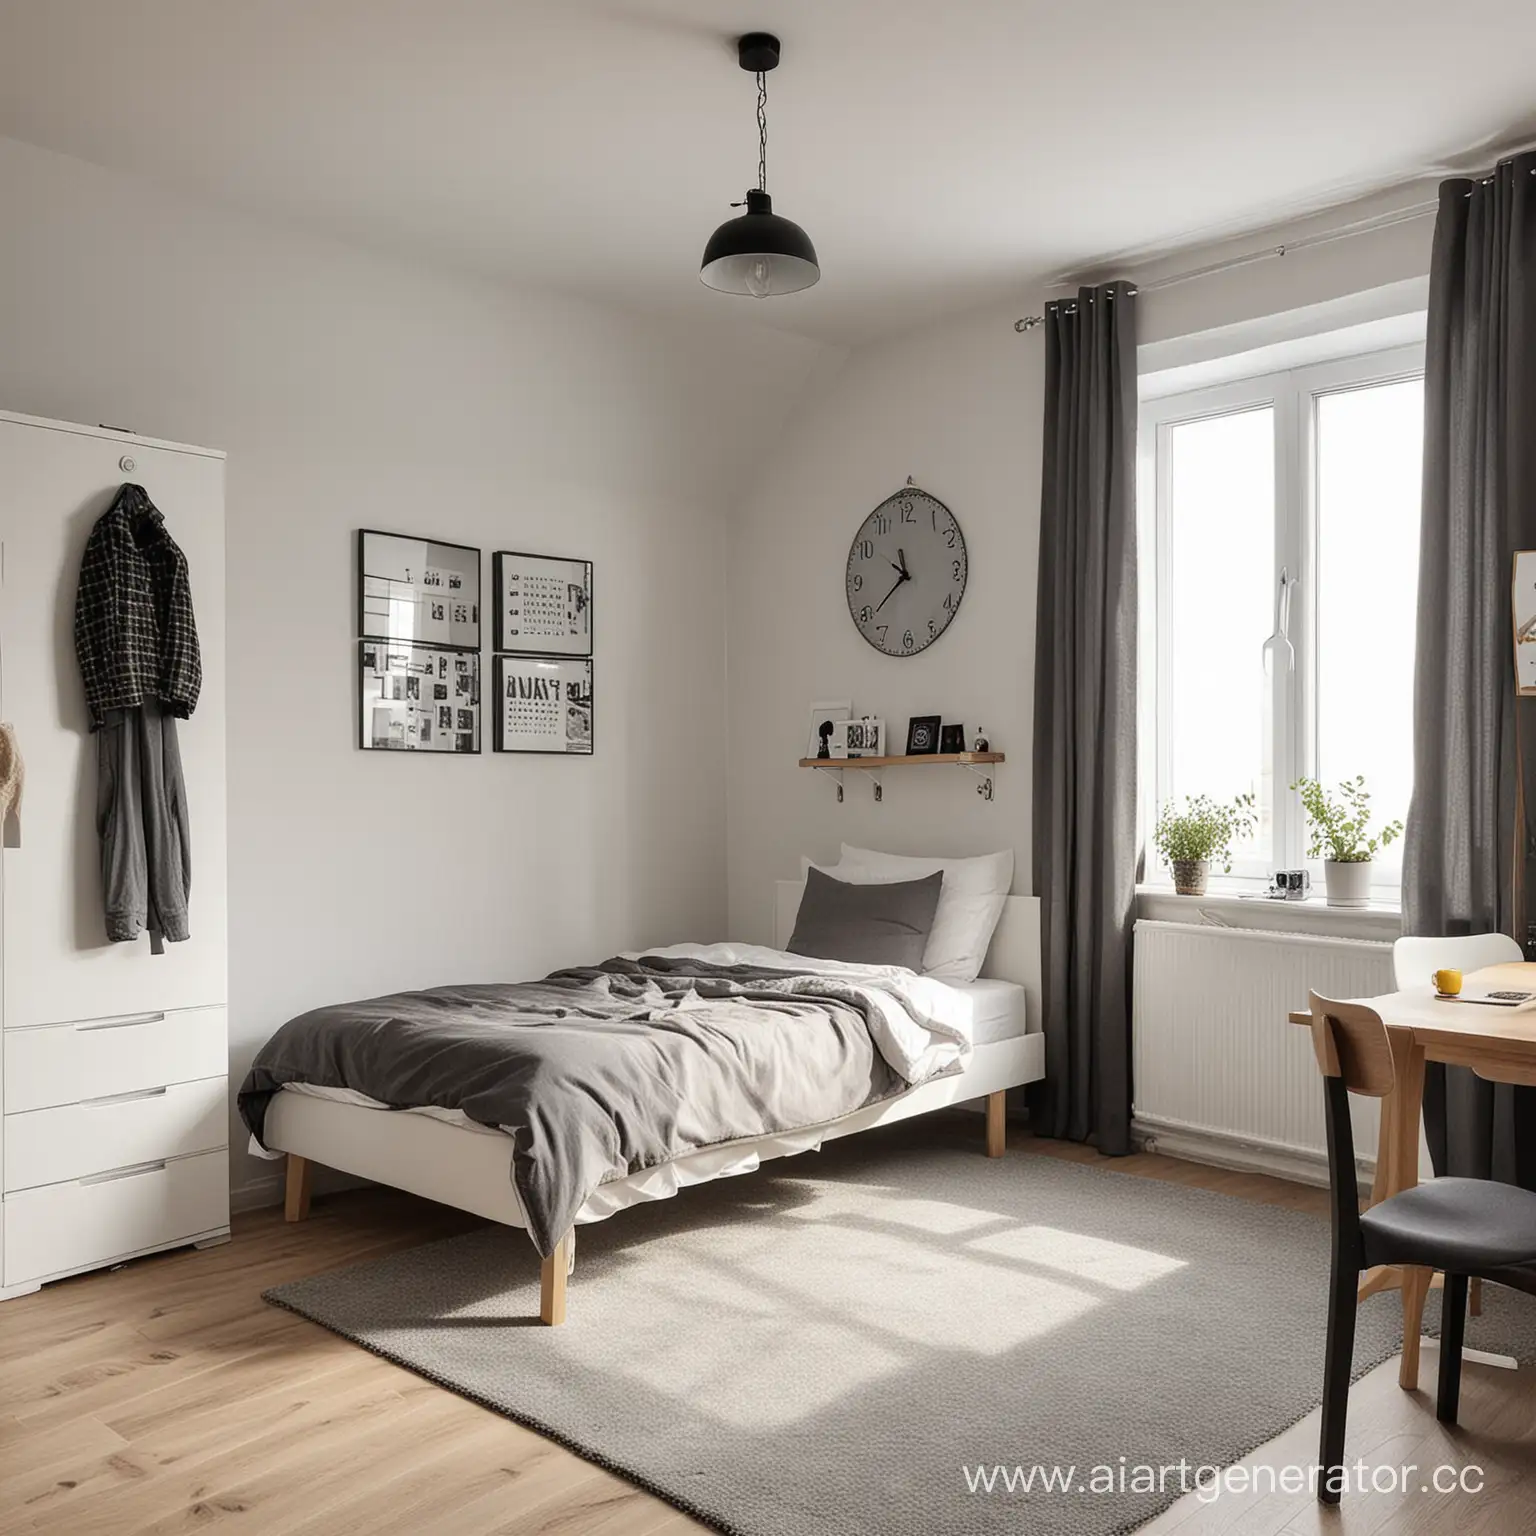 It's a big bedroom for one boy, scandinvian style, There is a single bed, There is a carpet on the floor, There is a clock on the wall,There are pictures on the wall on the left, There is a big mirror in the background